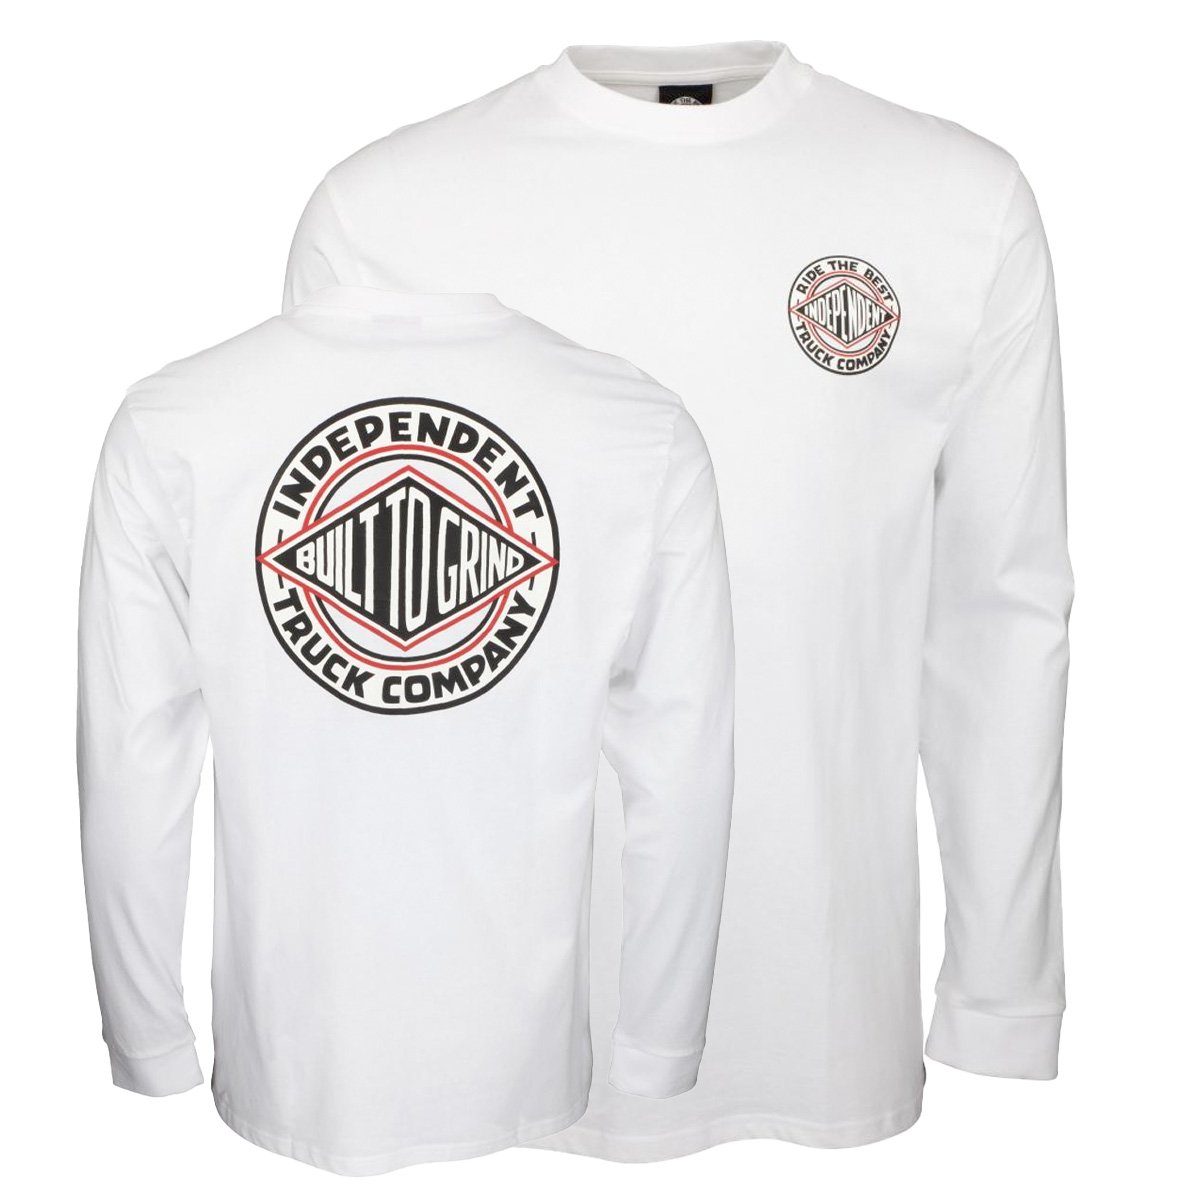 Grind Company Built Truck to Independent (white) Summit Longsleeve